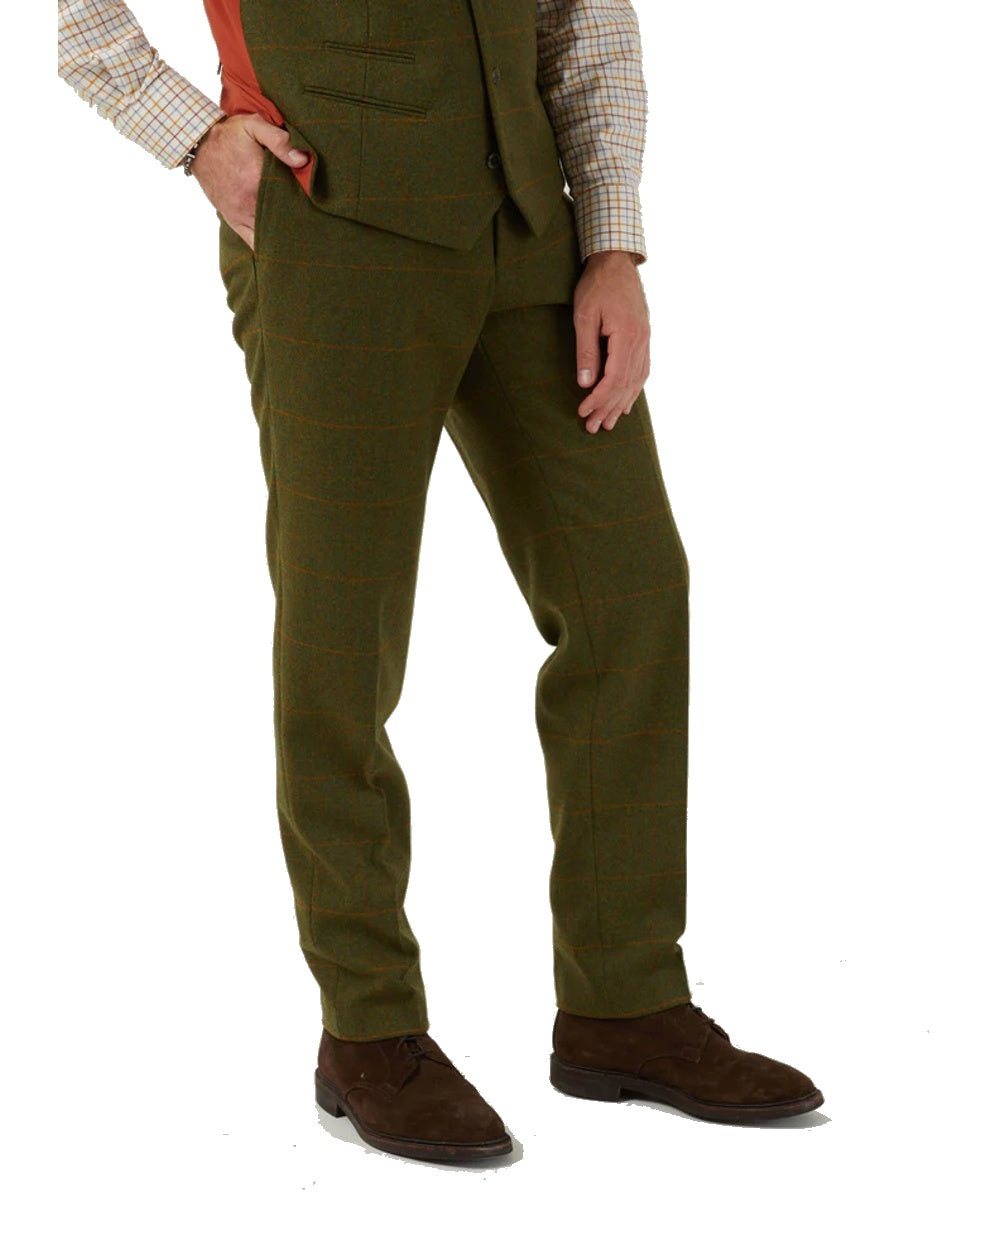 Alan Paine Combrook Mens Trousers in Maple 